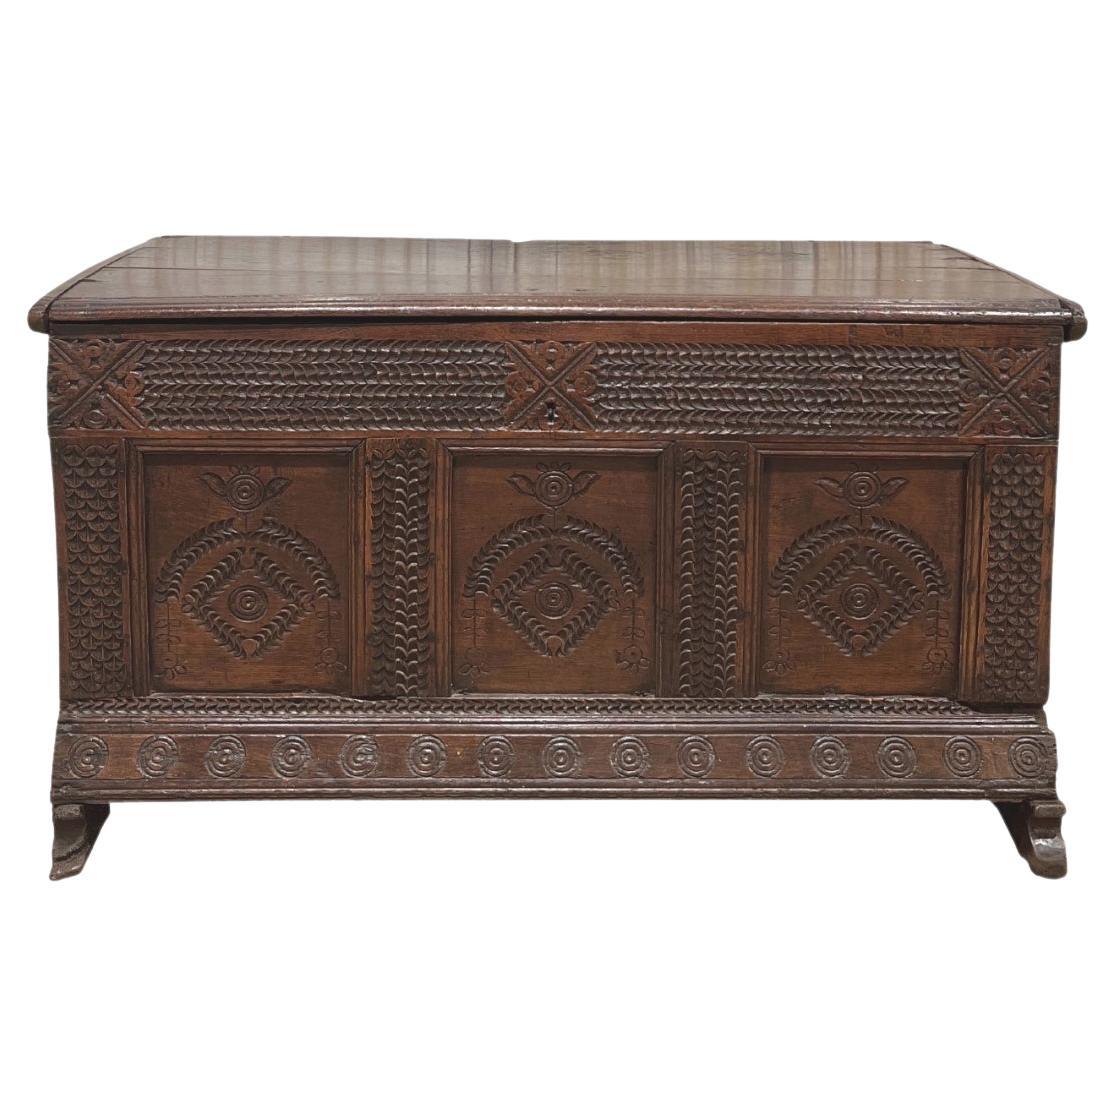 Mid-17th Century English Carved Oak Blanket Chest